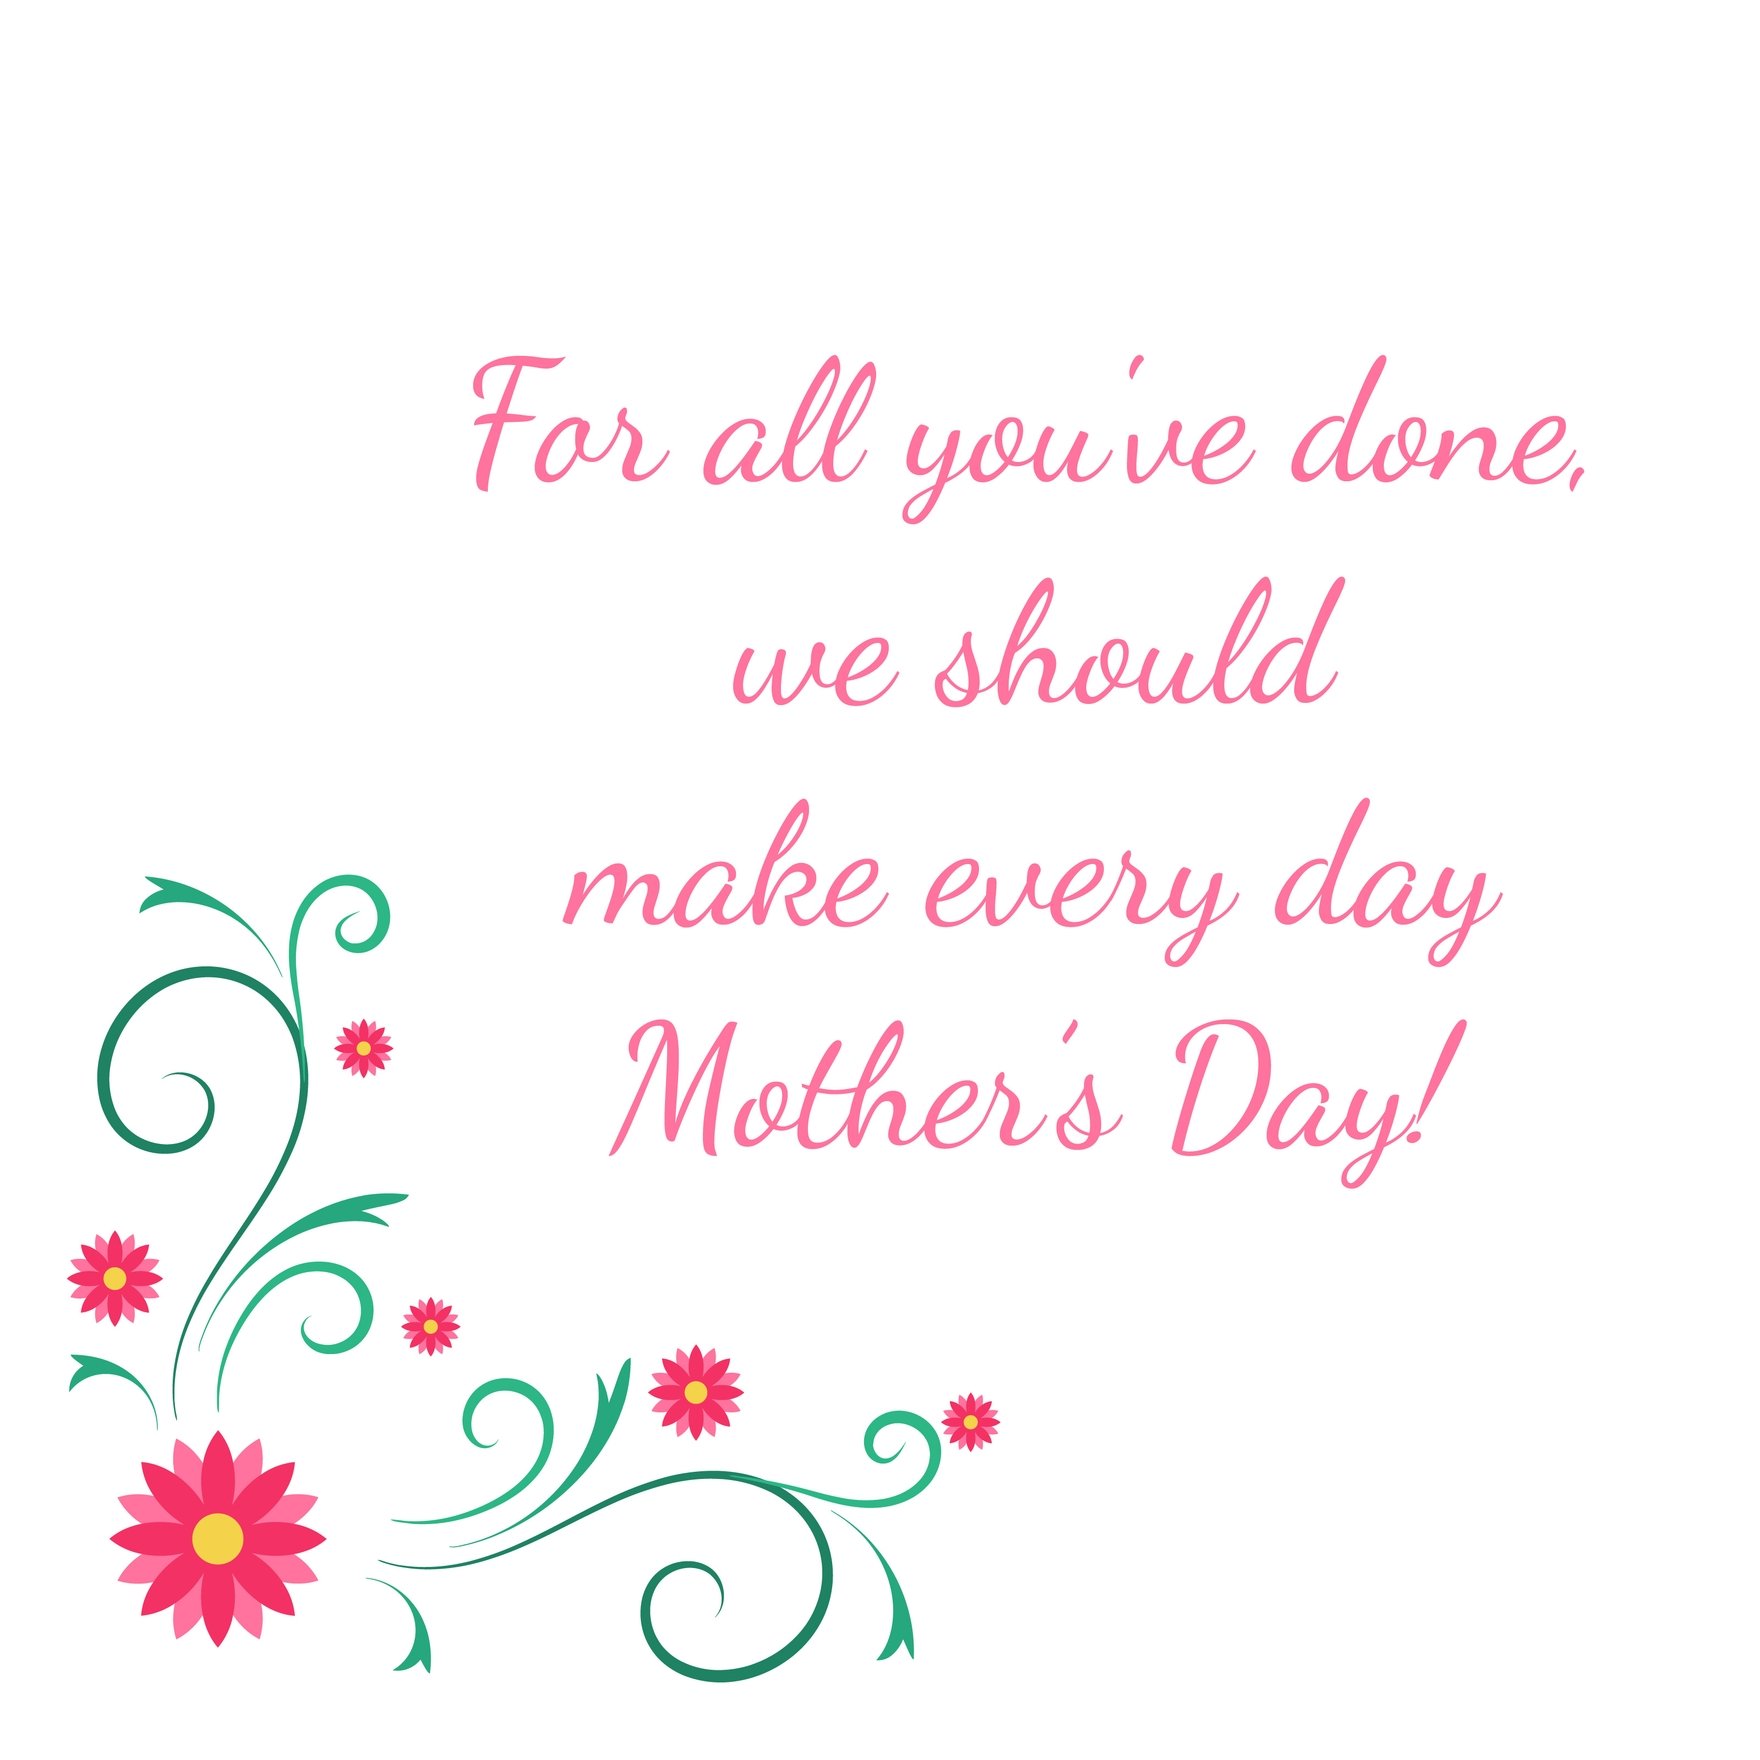 Free Happy Mother's Day Greetings GIF in Illustrator, EPS, SVG, JPG, GIF, PNG, After Effects